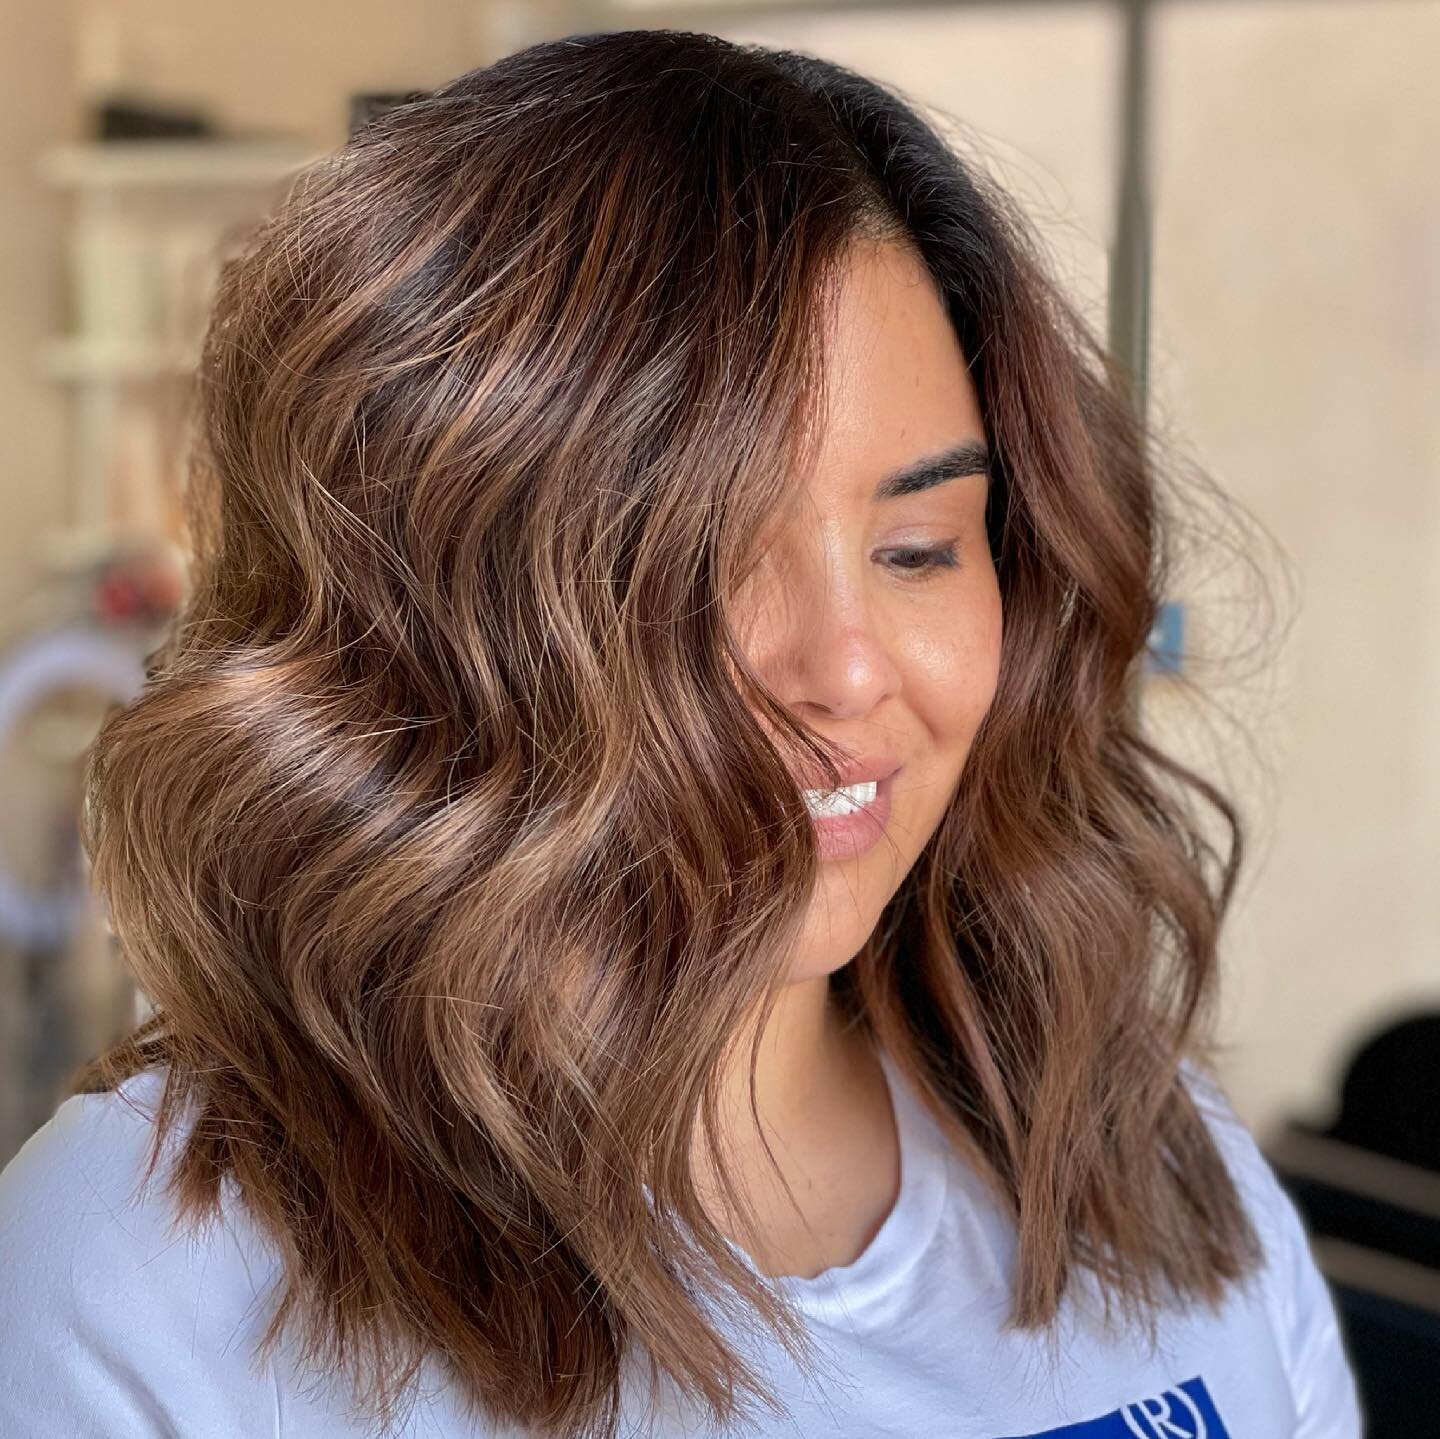 I love when my clients are willing to try something new.  Swipe to see the last session 
#creativecolor
#montecillolife #elpasohairstylist #elpasohair #elpasobalayage #babylights #balayage #blondes #copperhair  #framar #schwarzkopf #schwarzkopfusa #o